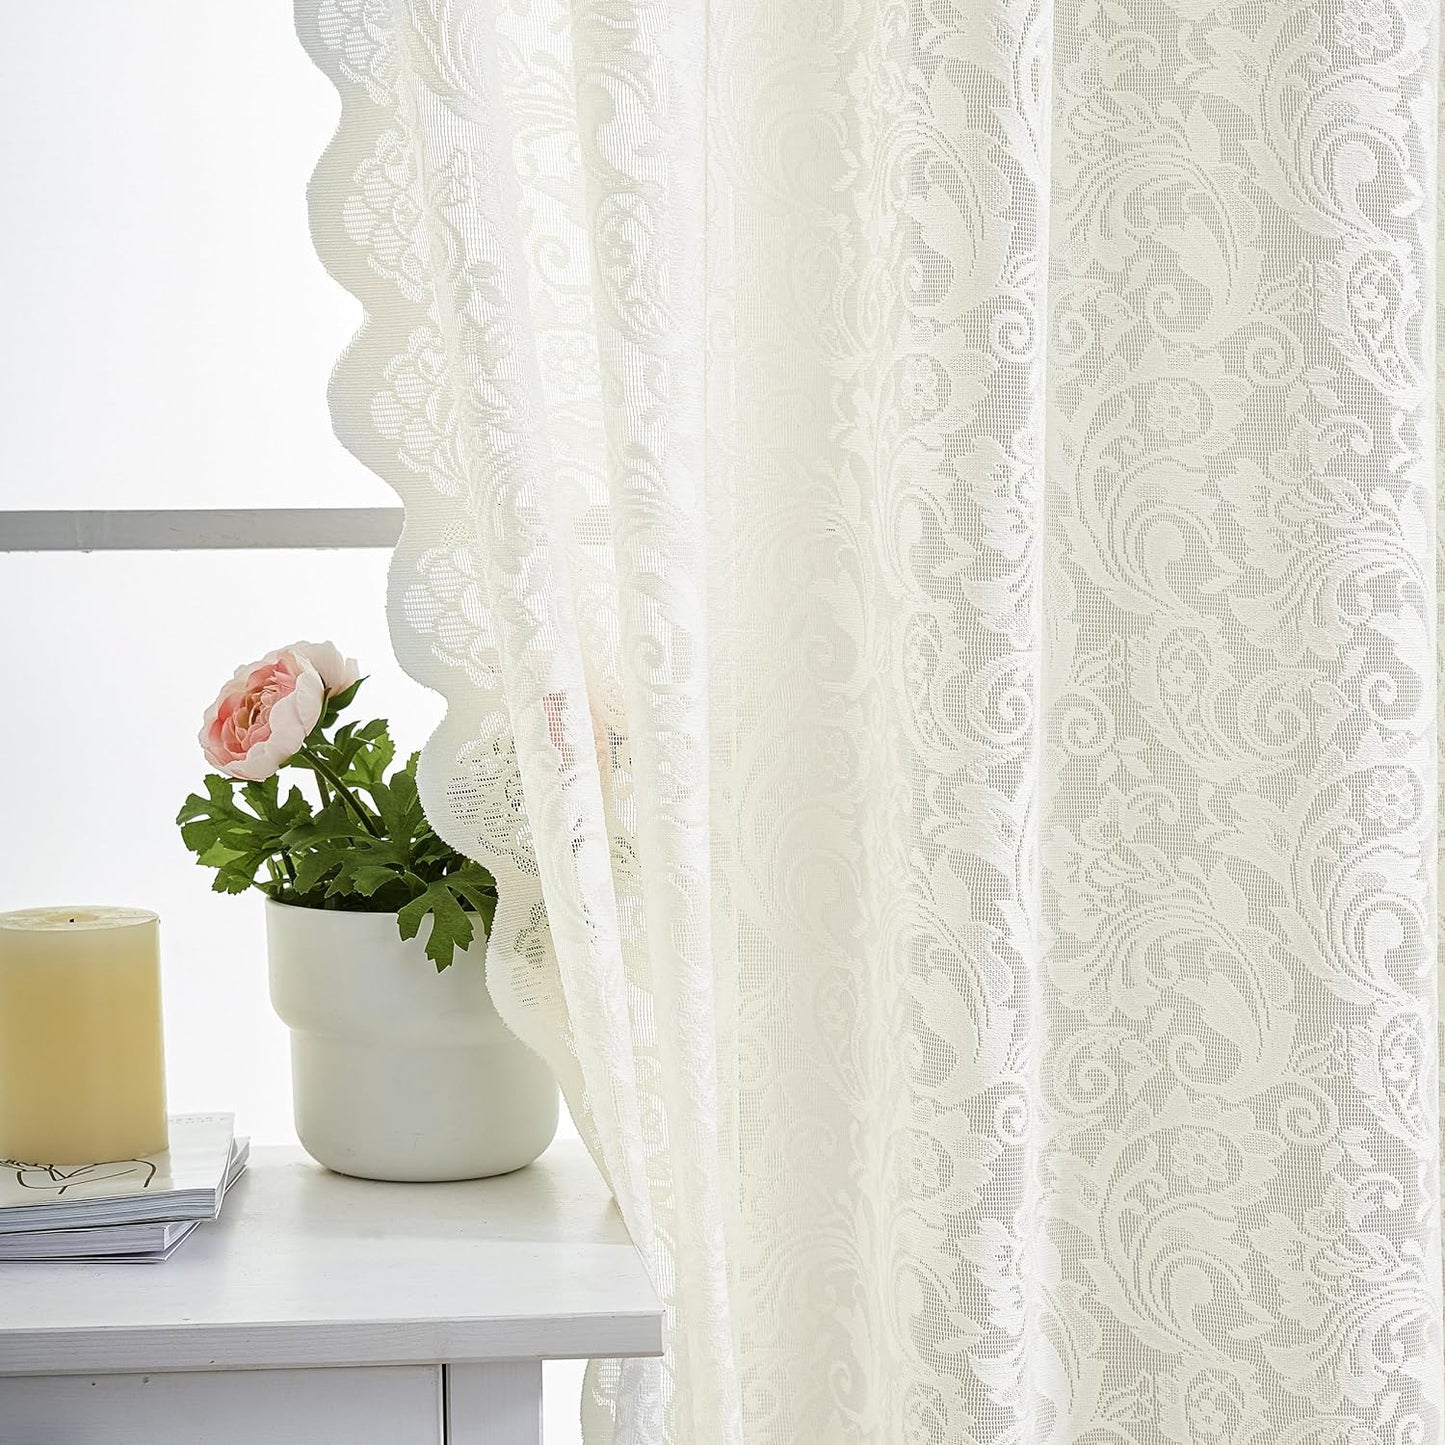 ALIGOGO White Lace Curtains 84 Inches Long-Vintage Floral Luxury Lace Sheer Curtains for Living Room 2 Panels Rod Pocket 52 W X 84 L Inch,White  ALIGOGO Ivory 52" W X 45" L 